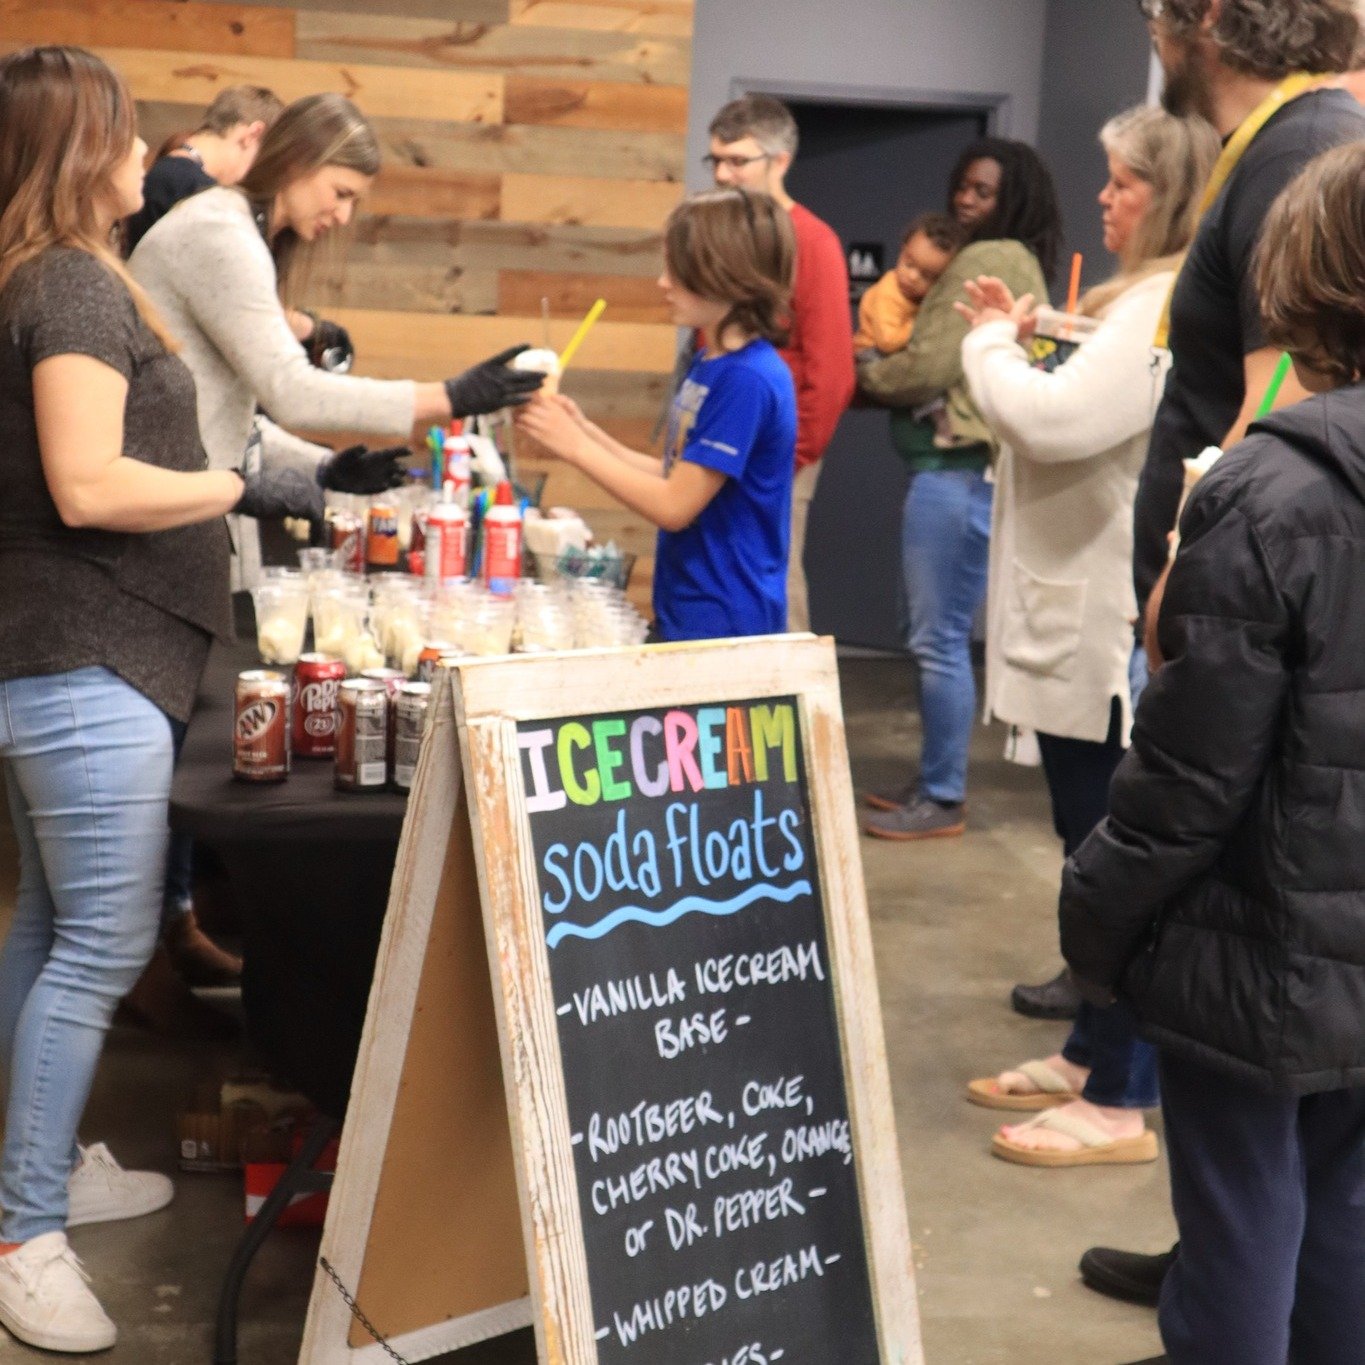 You probably didn&rsquo;t think you needed to start your morning with soda and ice cream, until you tried it. 

We had a blast sharing soda floats with all of you yesterday!

#mycollectivechurch
#forfrederick
#downtownfrederick
#frederickmd